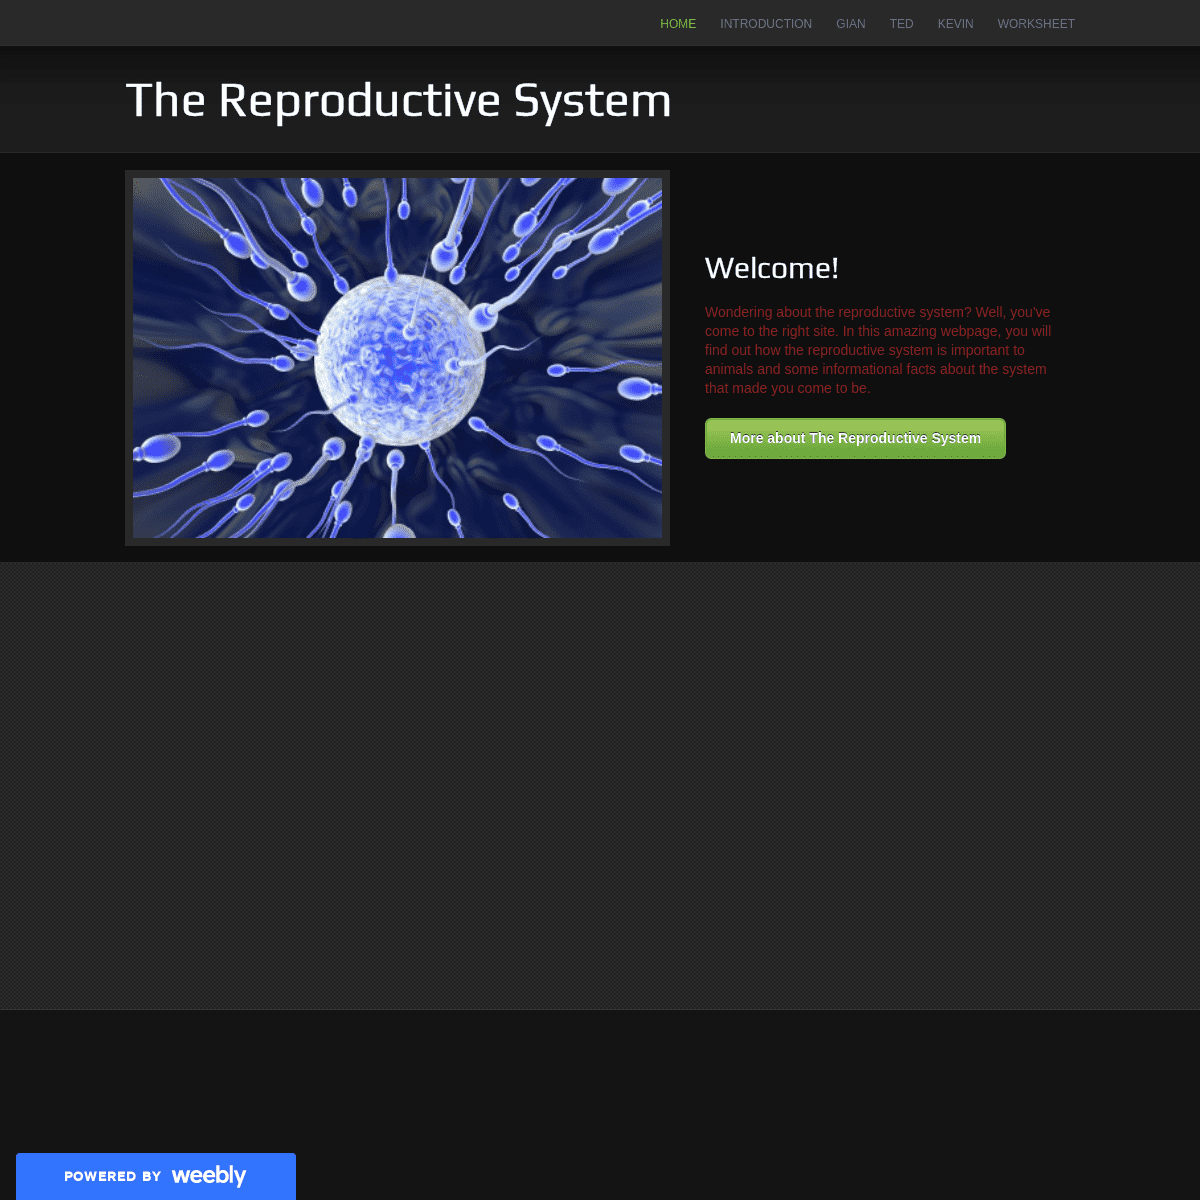 A complete backup of reproductive17.weebly.com